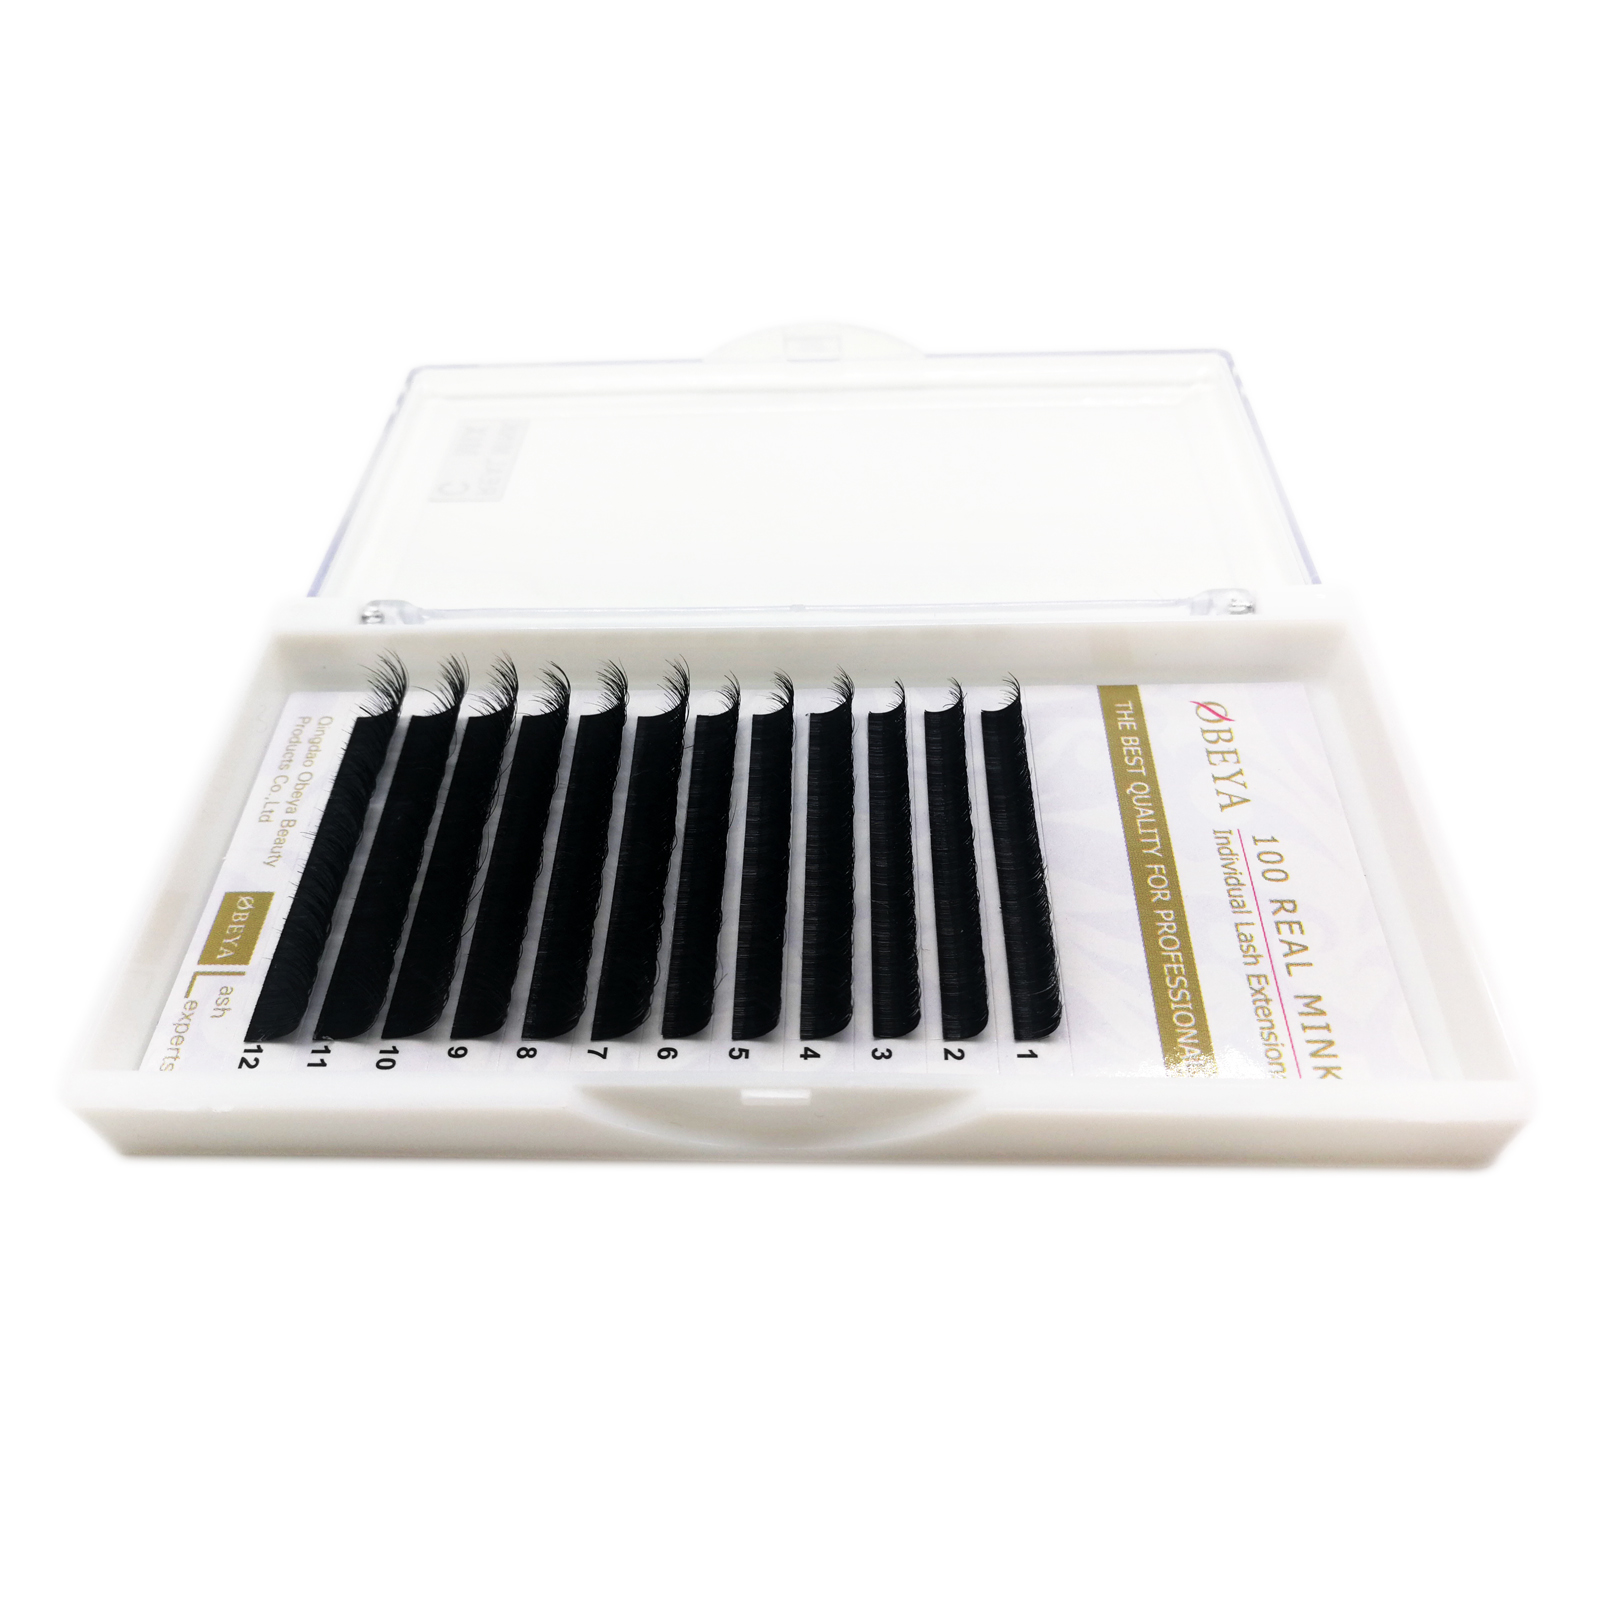 C and D Curl Wholesale Price for Real Mink Eyelash Extension with Customized Box in the Canada YY92